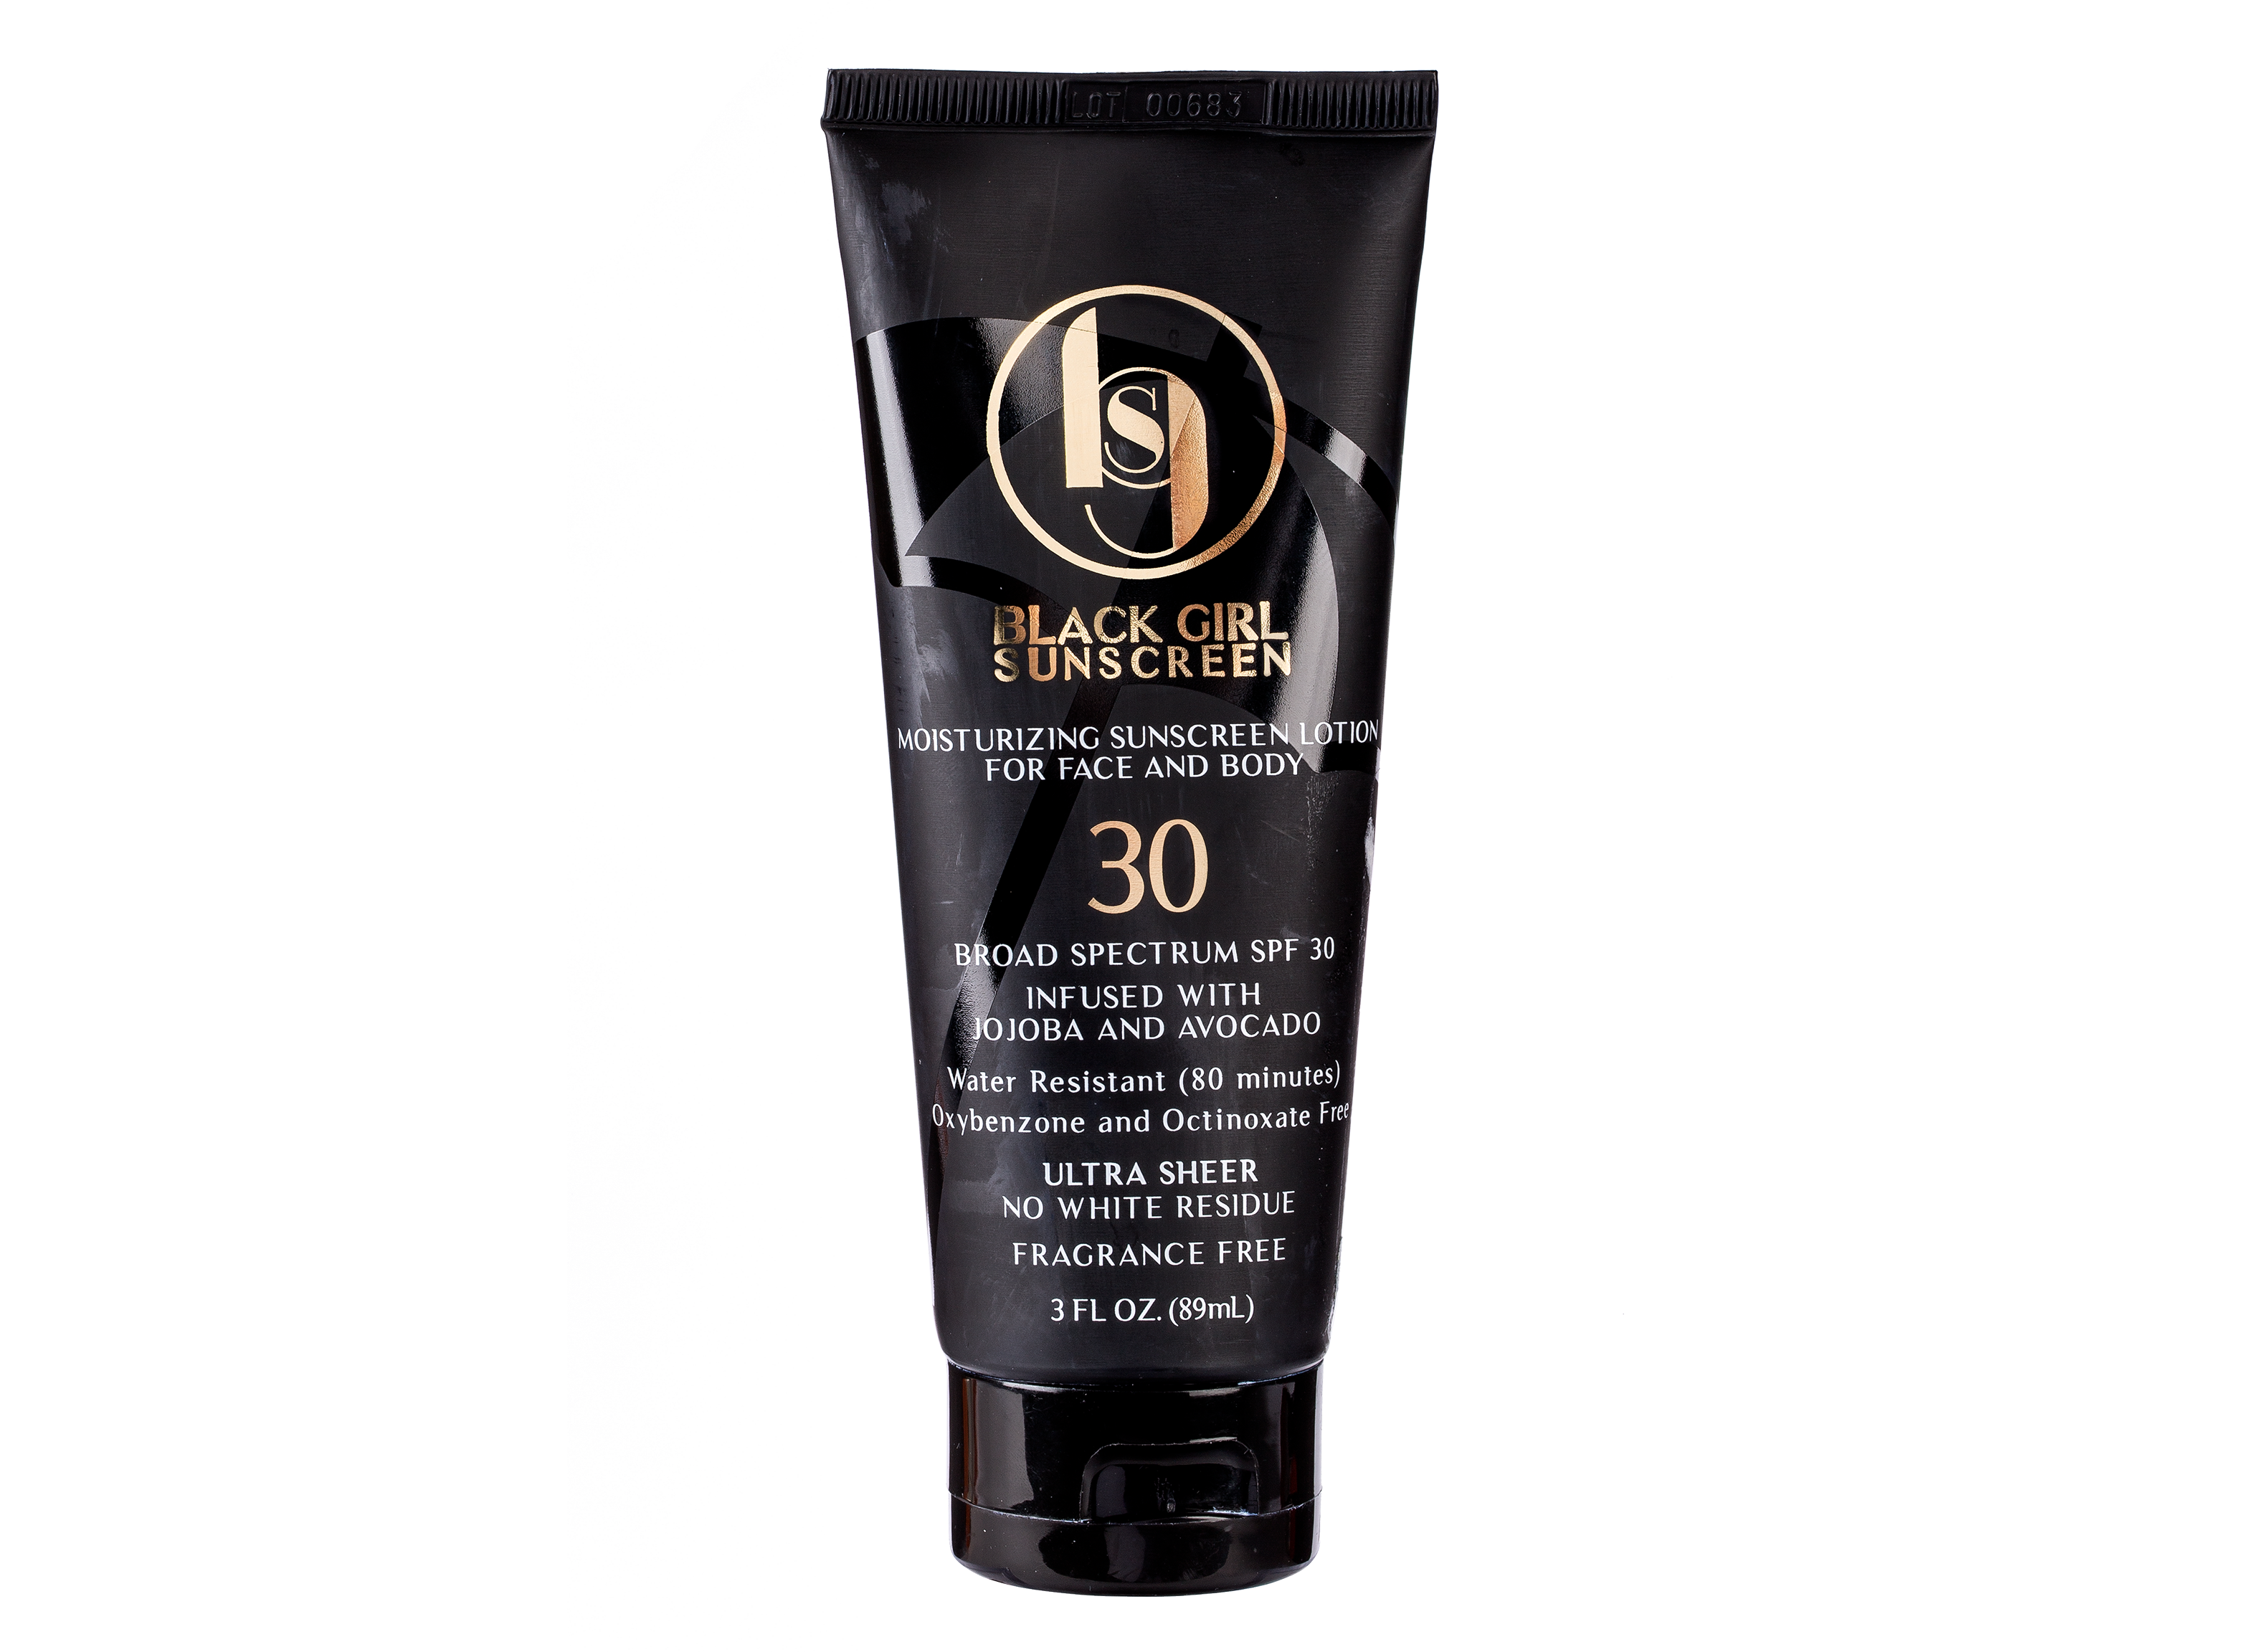 Black Girl Sunscreen Ultra Sheer Lotion SPF 30 Fragrance Free Sunscreen  Review - Consumer Reports